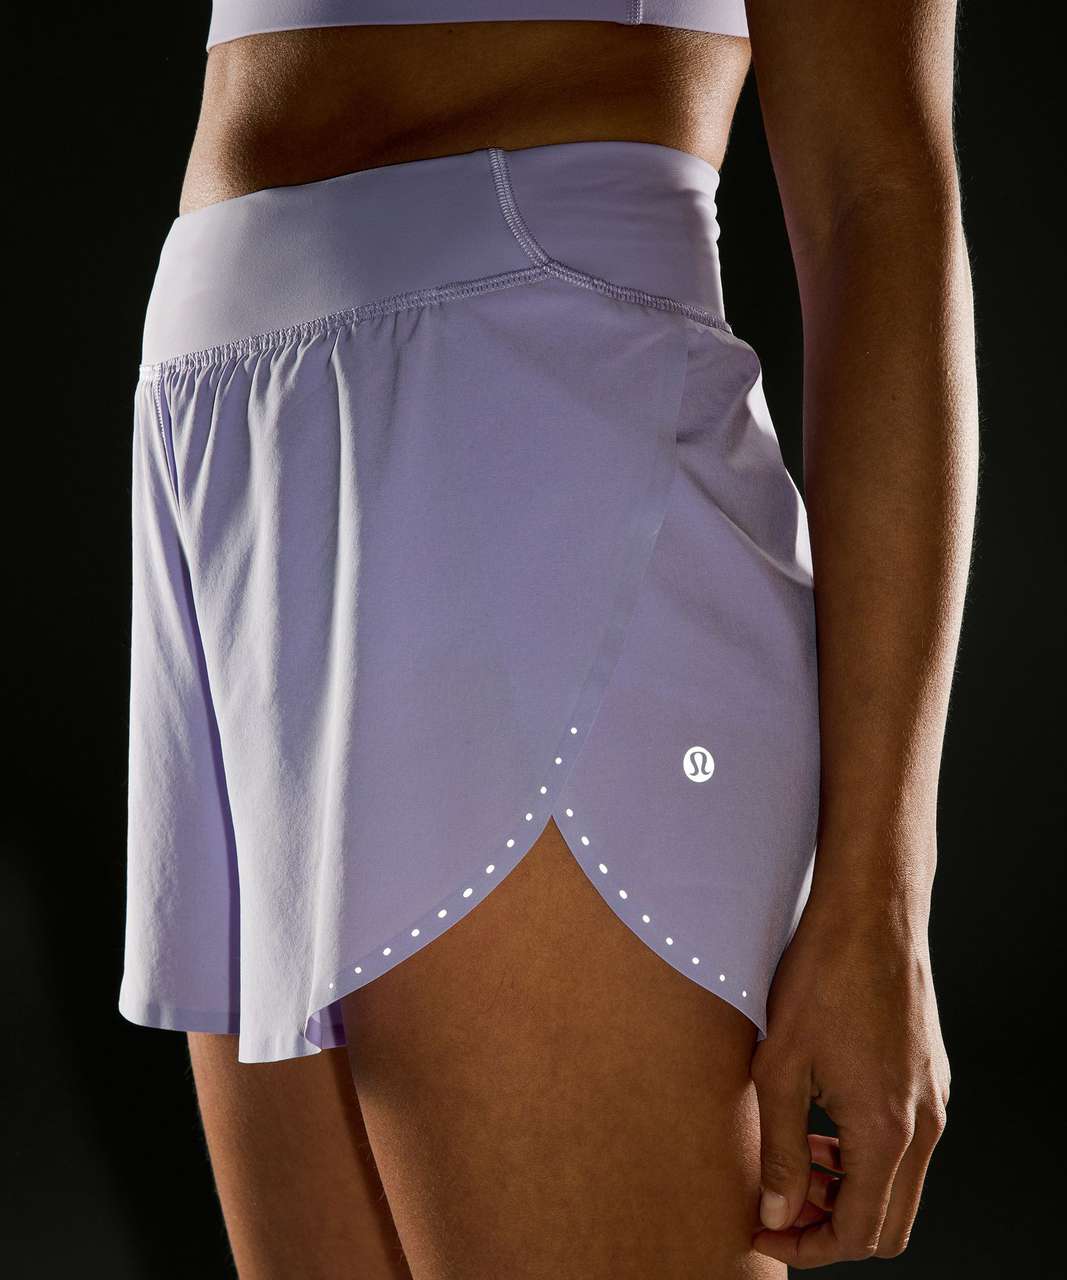 Lululemon Fast and Free Reflective High-Rise Classic-Fit Short 3" - Lilac Smoke